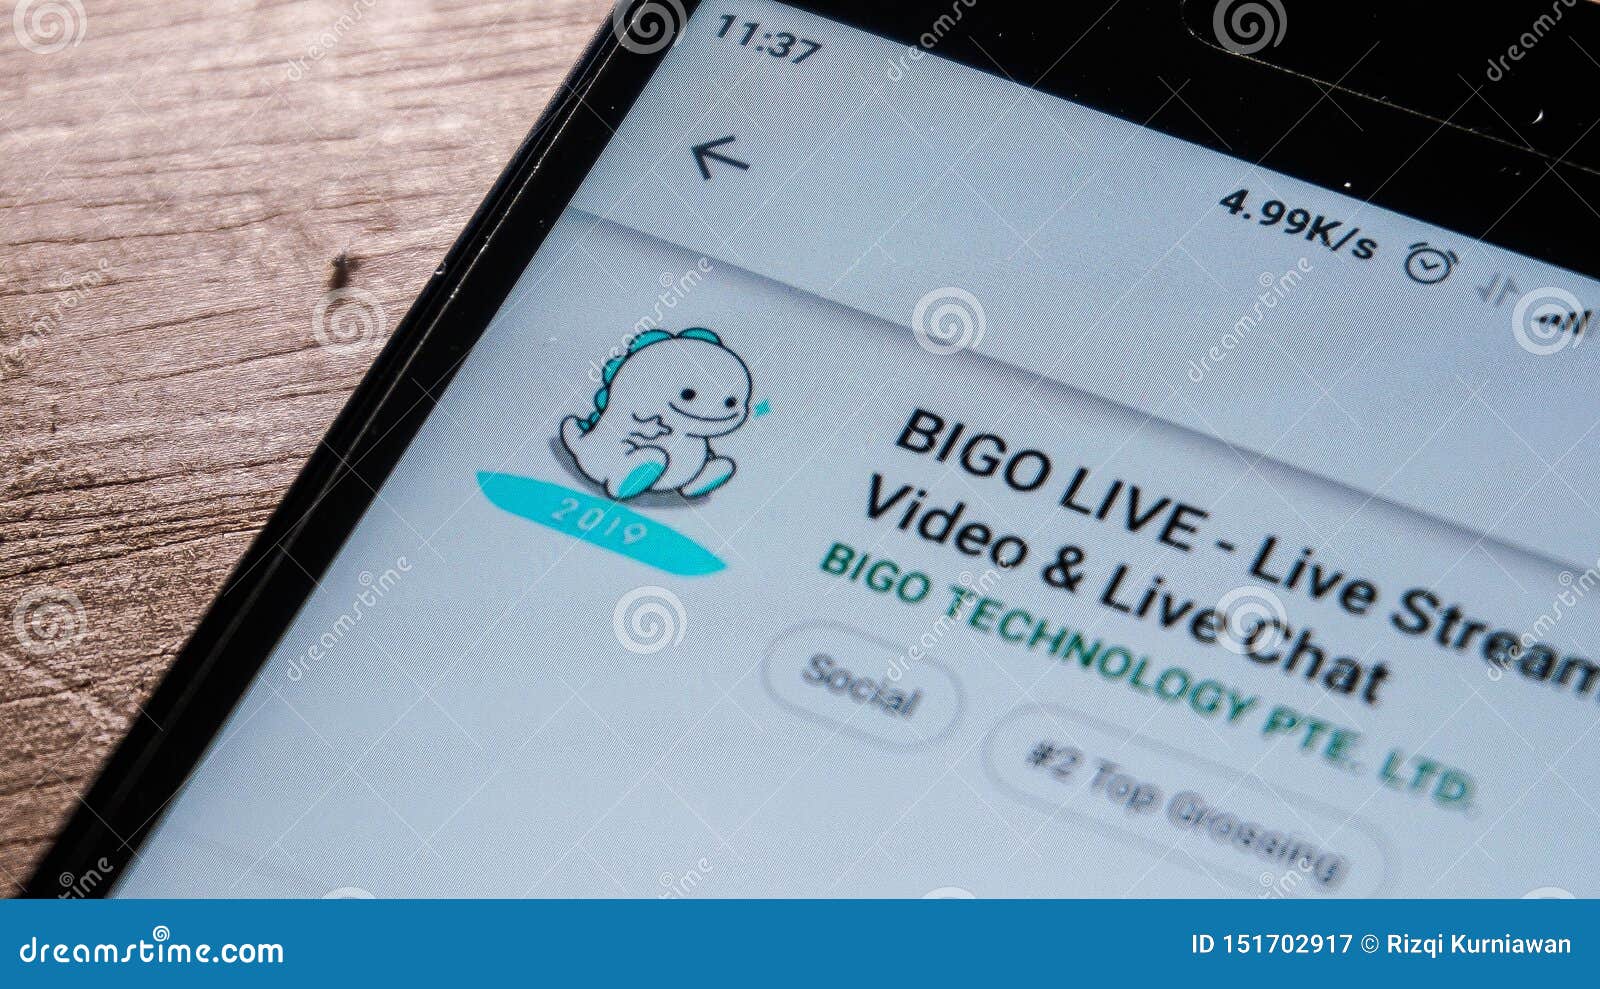 Android app live chat for Live Streaming